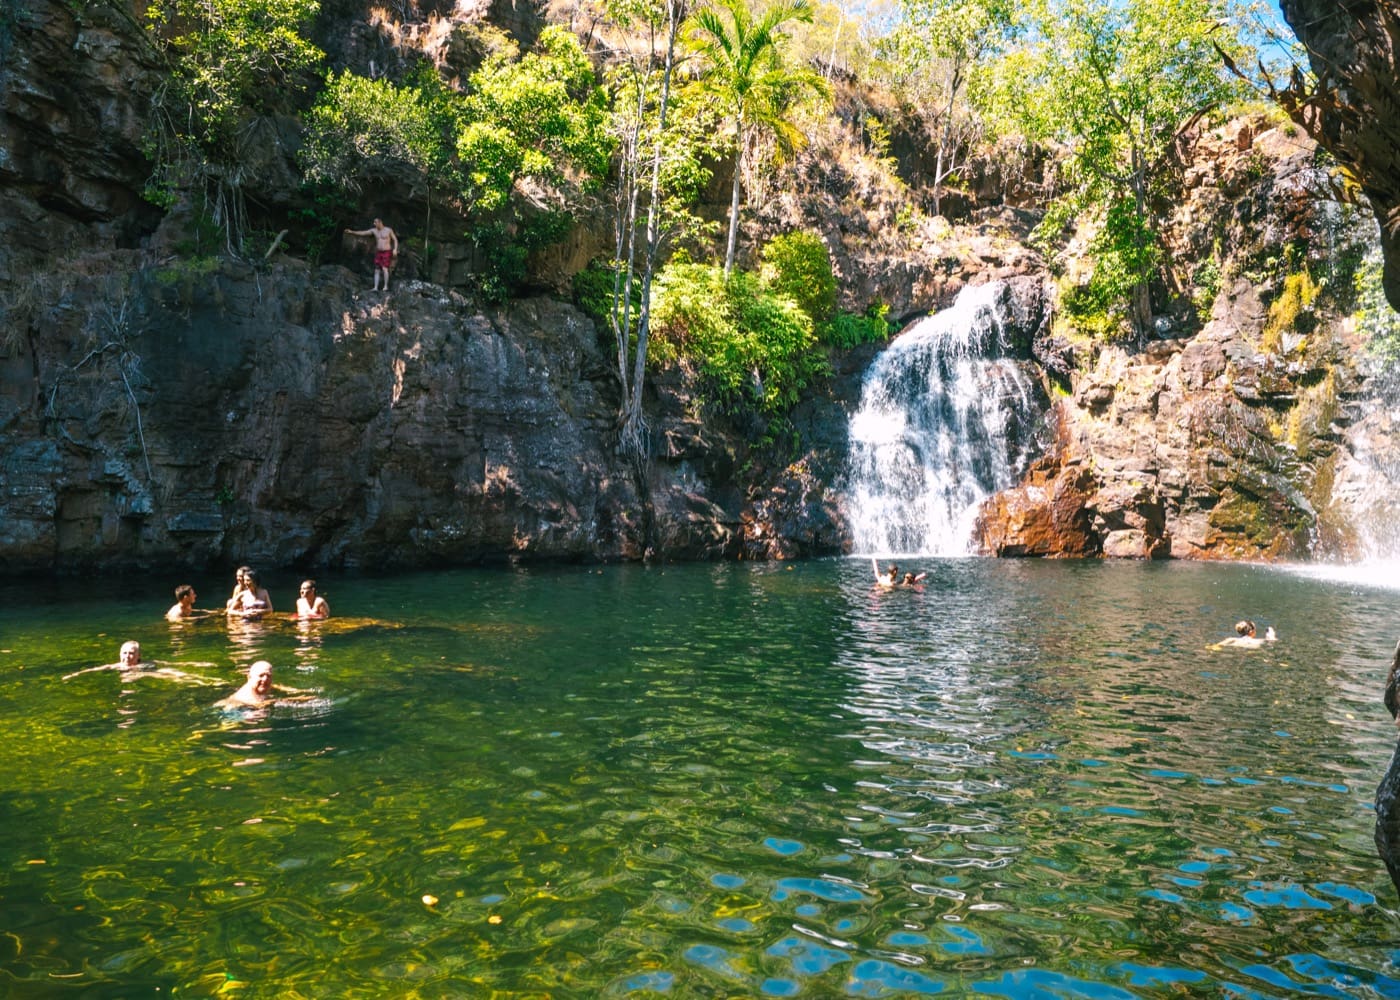 Litchfield National Park - Visitors taking a dip in Florence falls